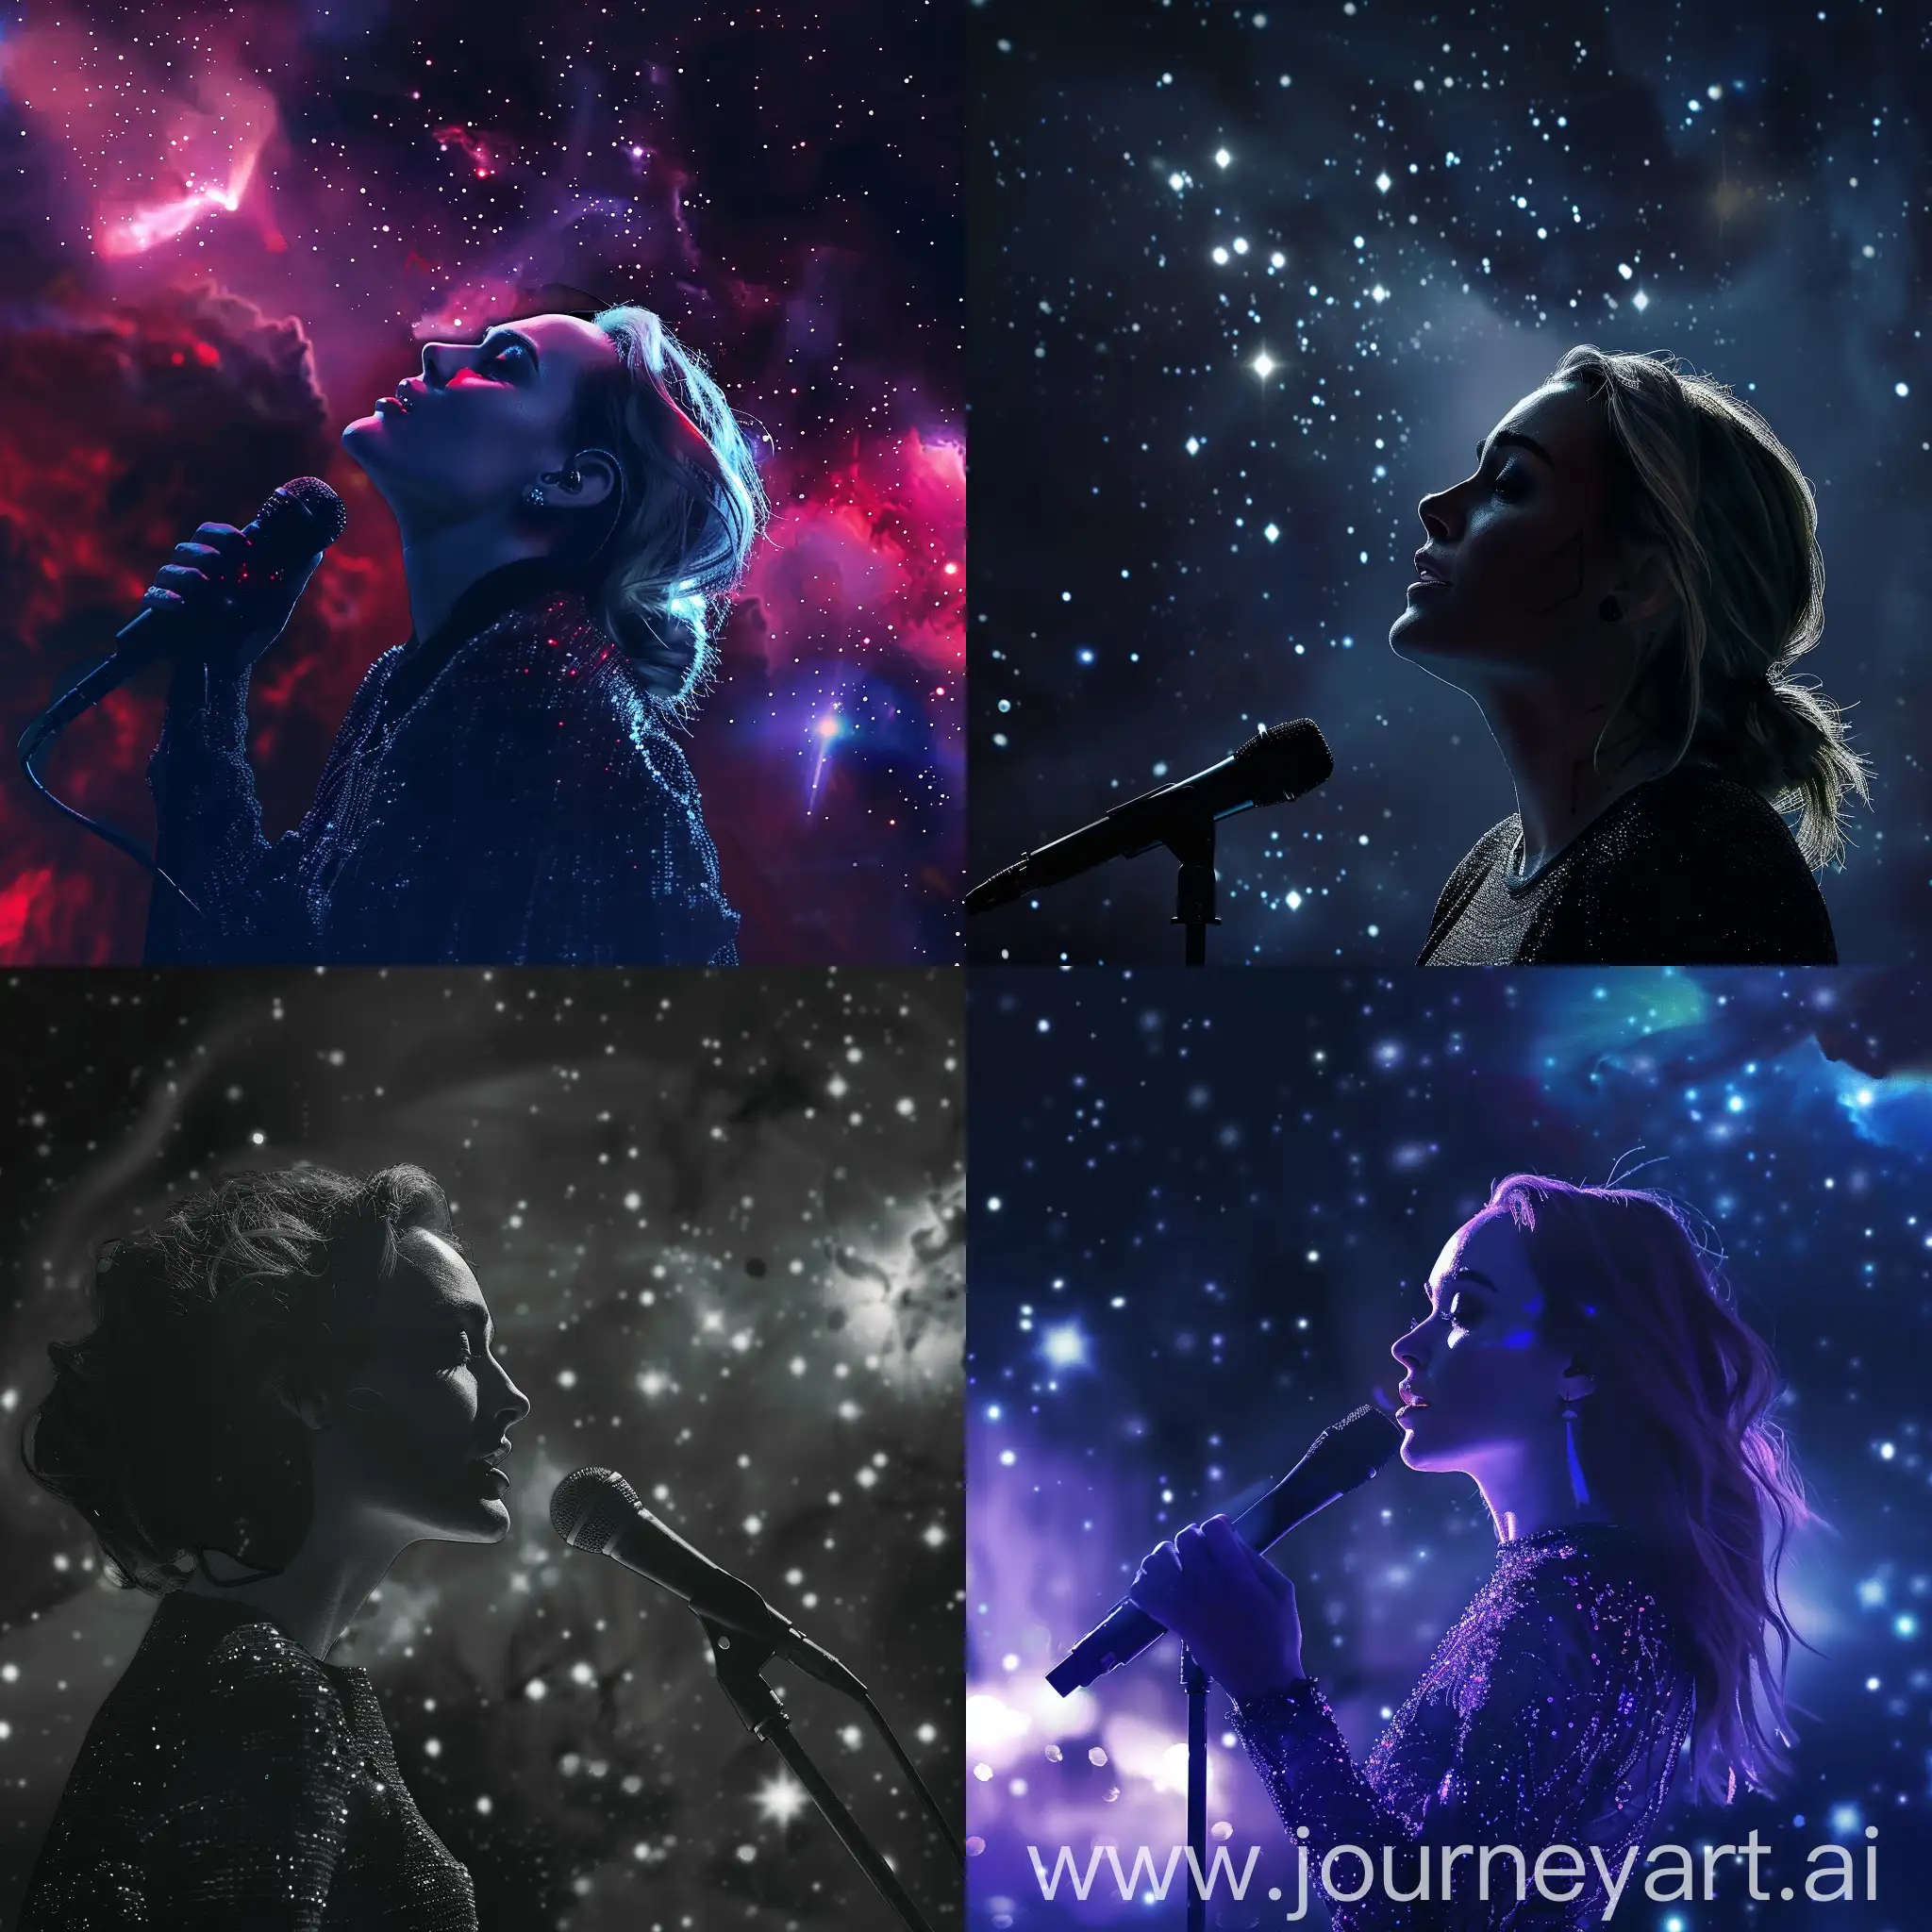 Skinn, Adele, sings a song, at a microphone, in space.